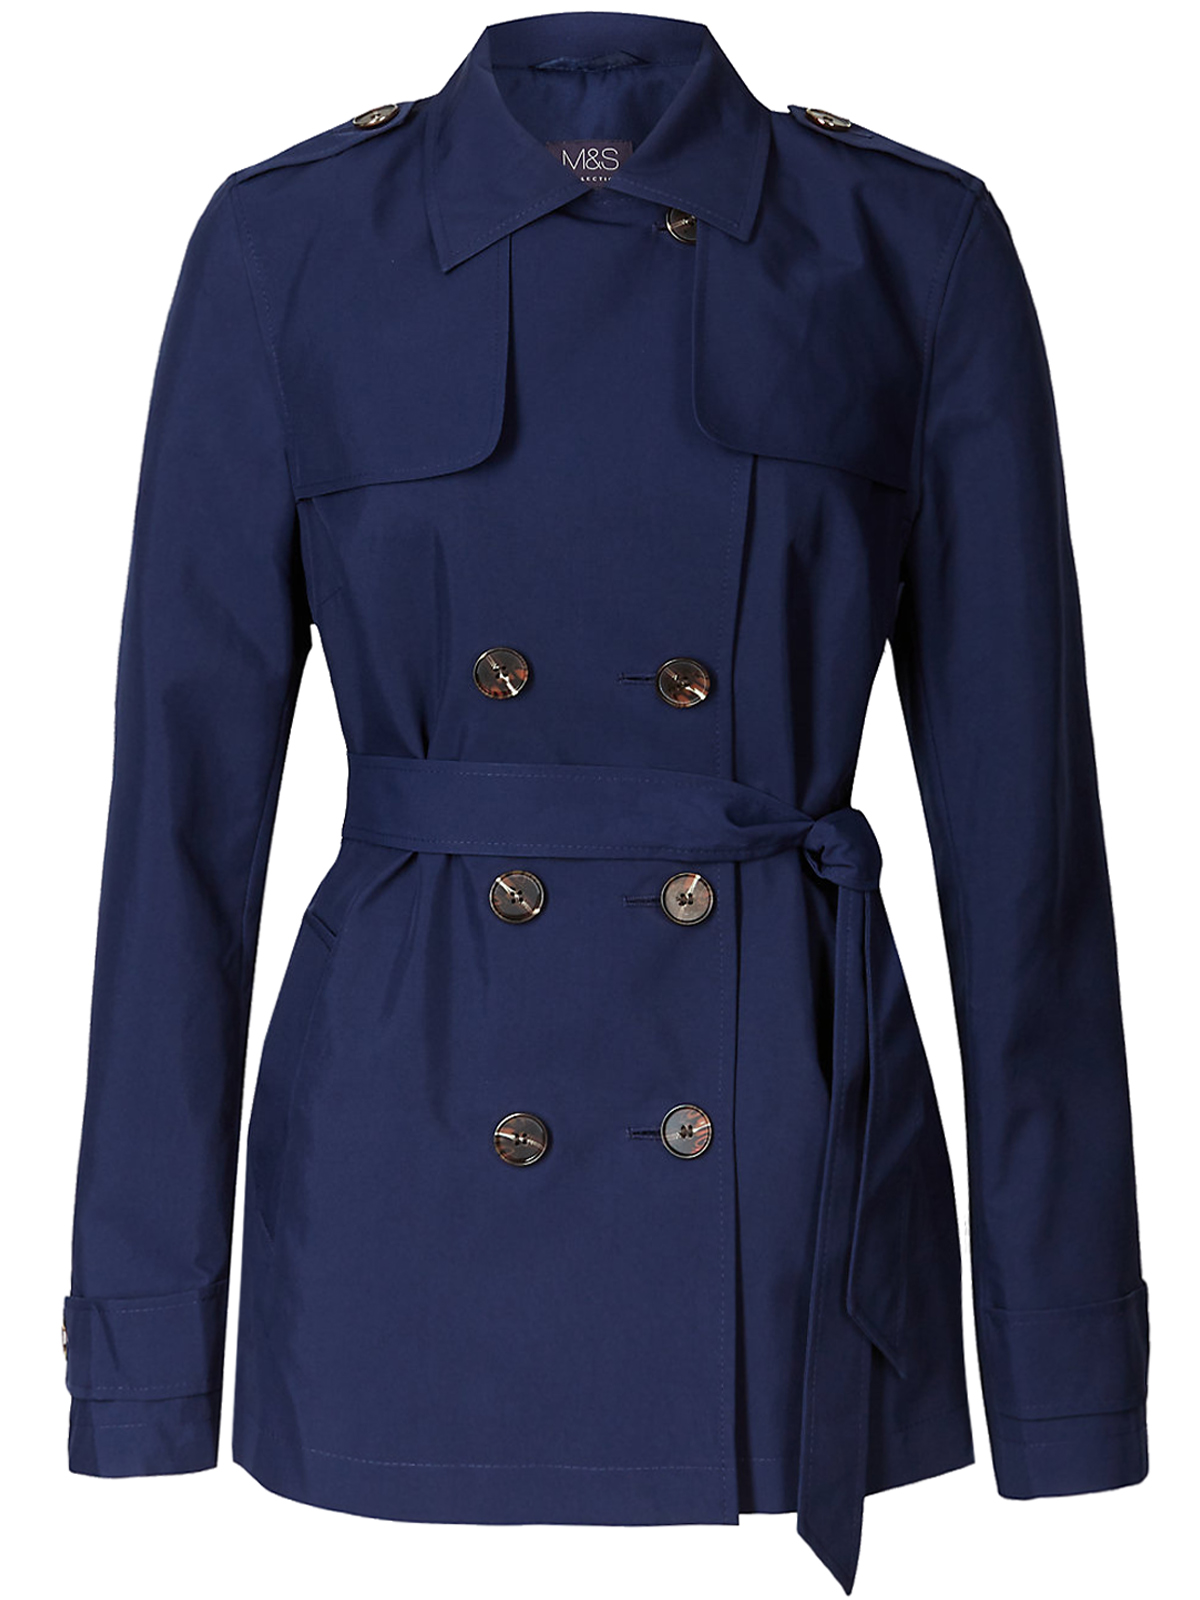 Marks and Spencer - - M&5 NAVY Belted Trench Coat with Stormwear - Size